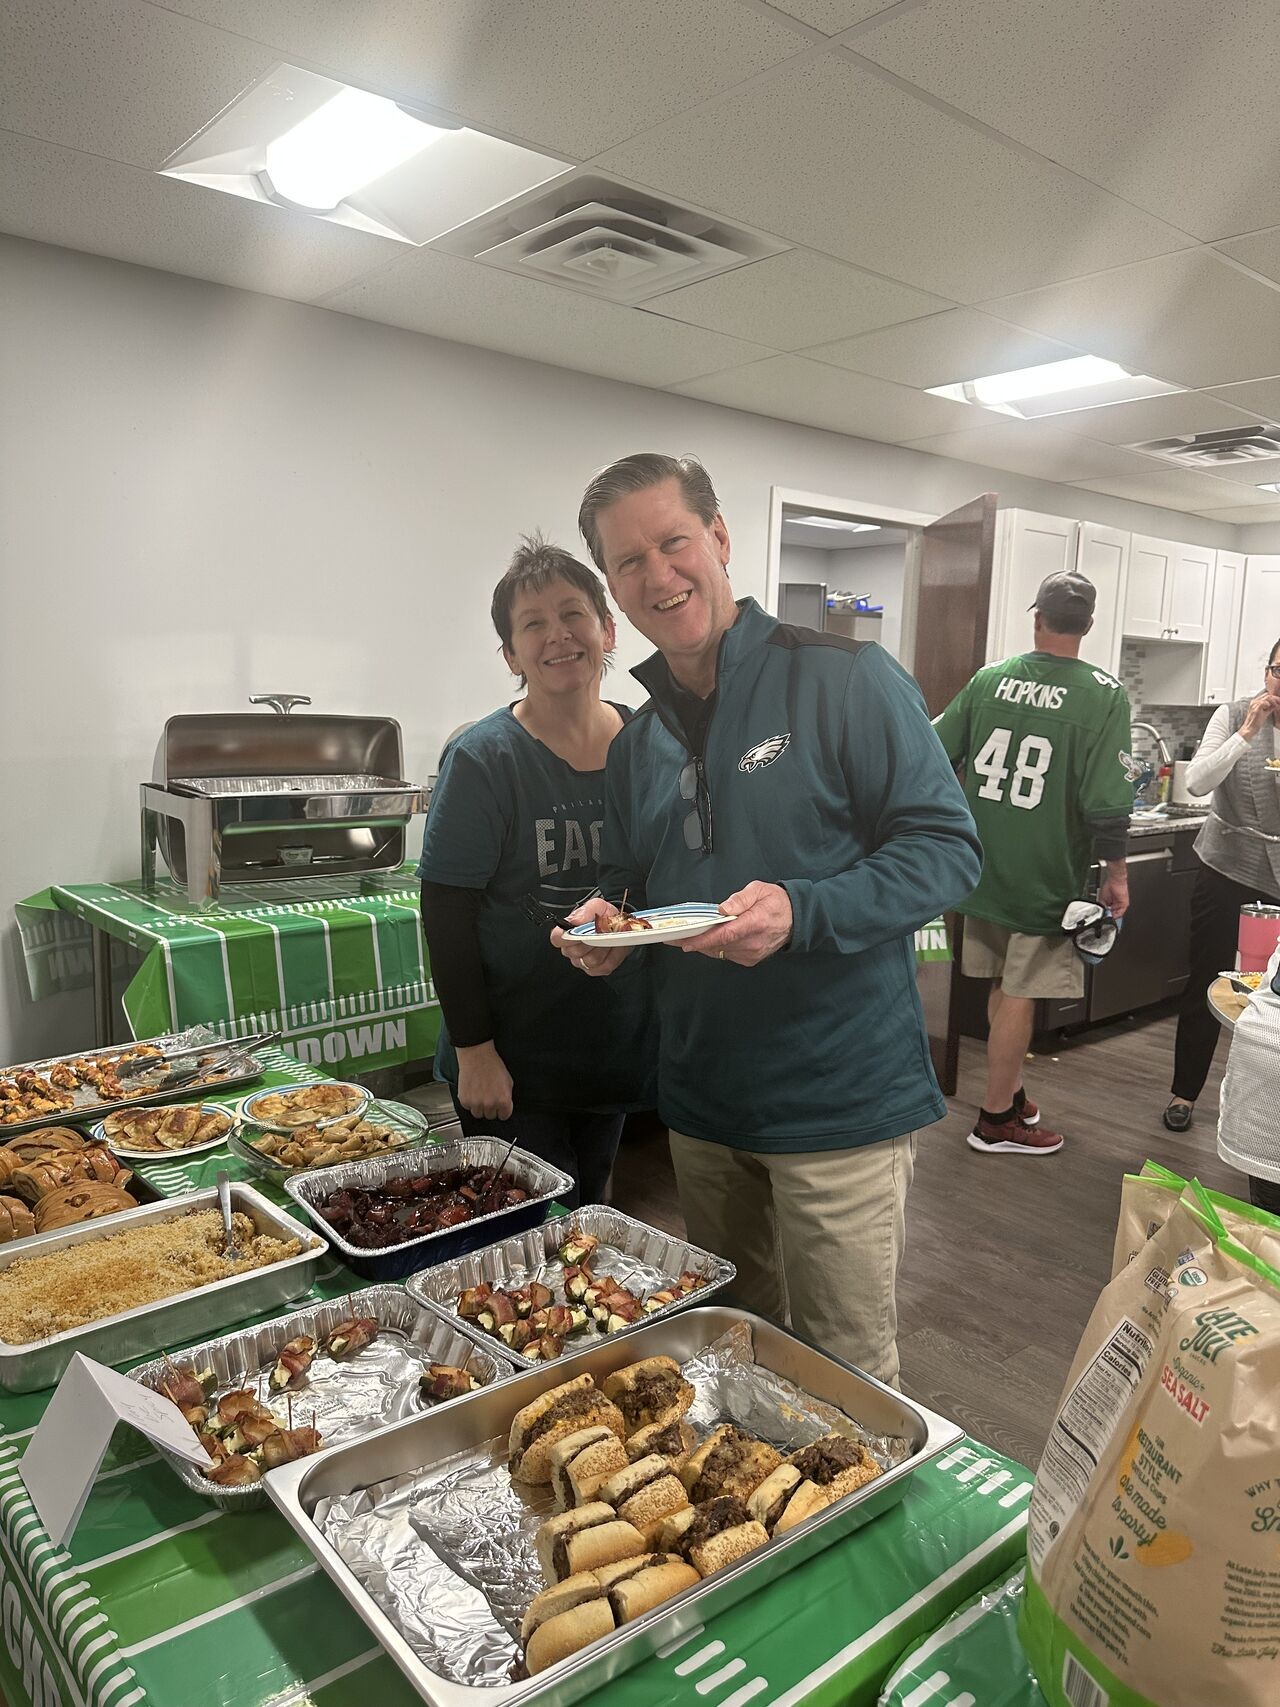 Go Birds! We love celebrating our Eagles with an ICS Potluck